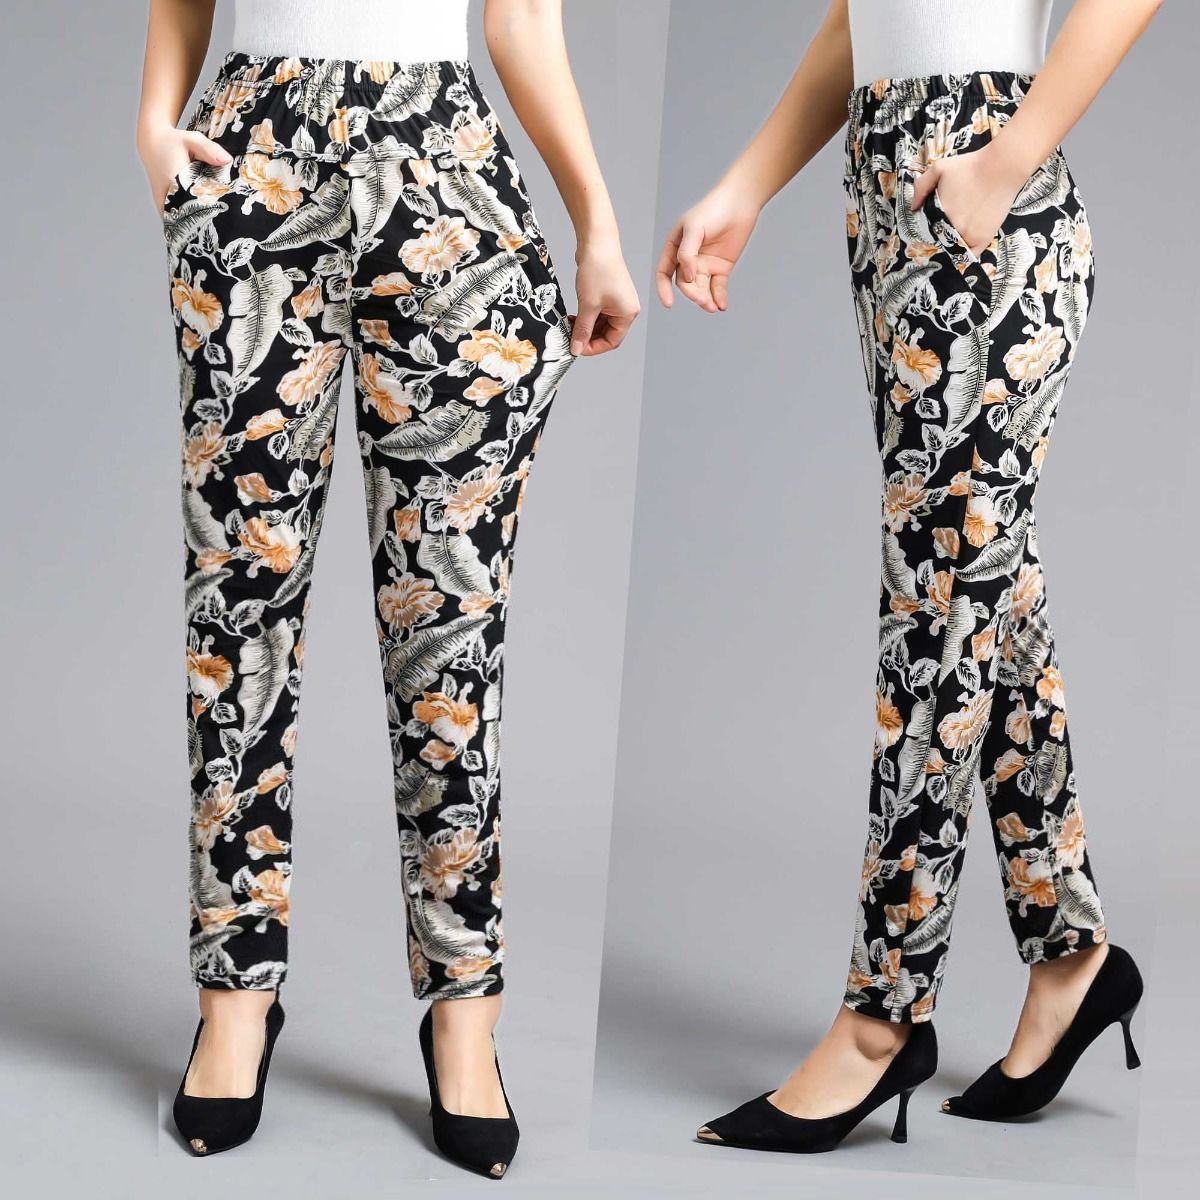 Summer middle-aged and elderly women's pants casual pants high waist elastic flowered pants mother flowered pants middle-aged women's Pants Large flowered pants